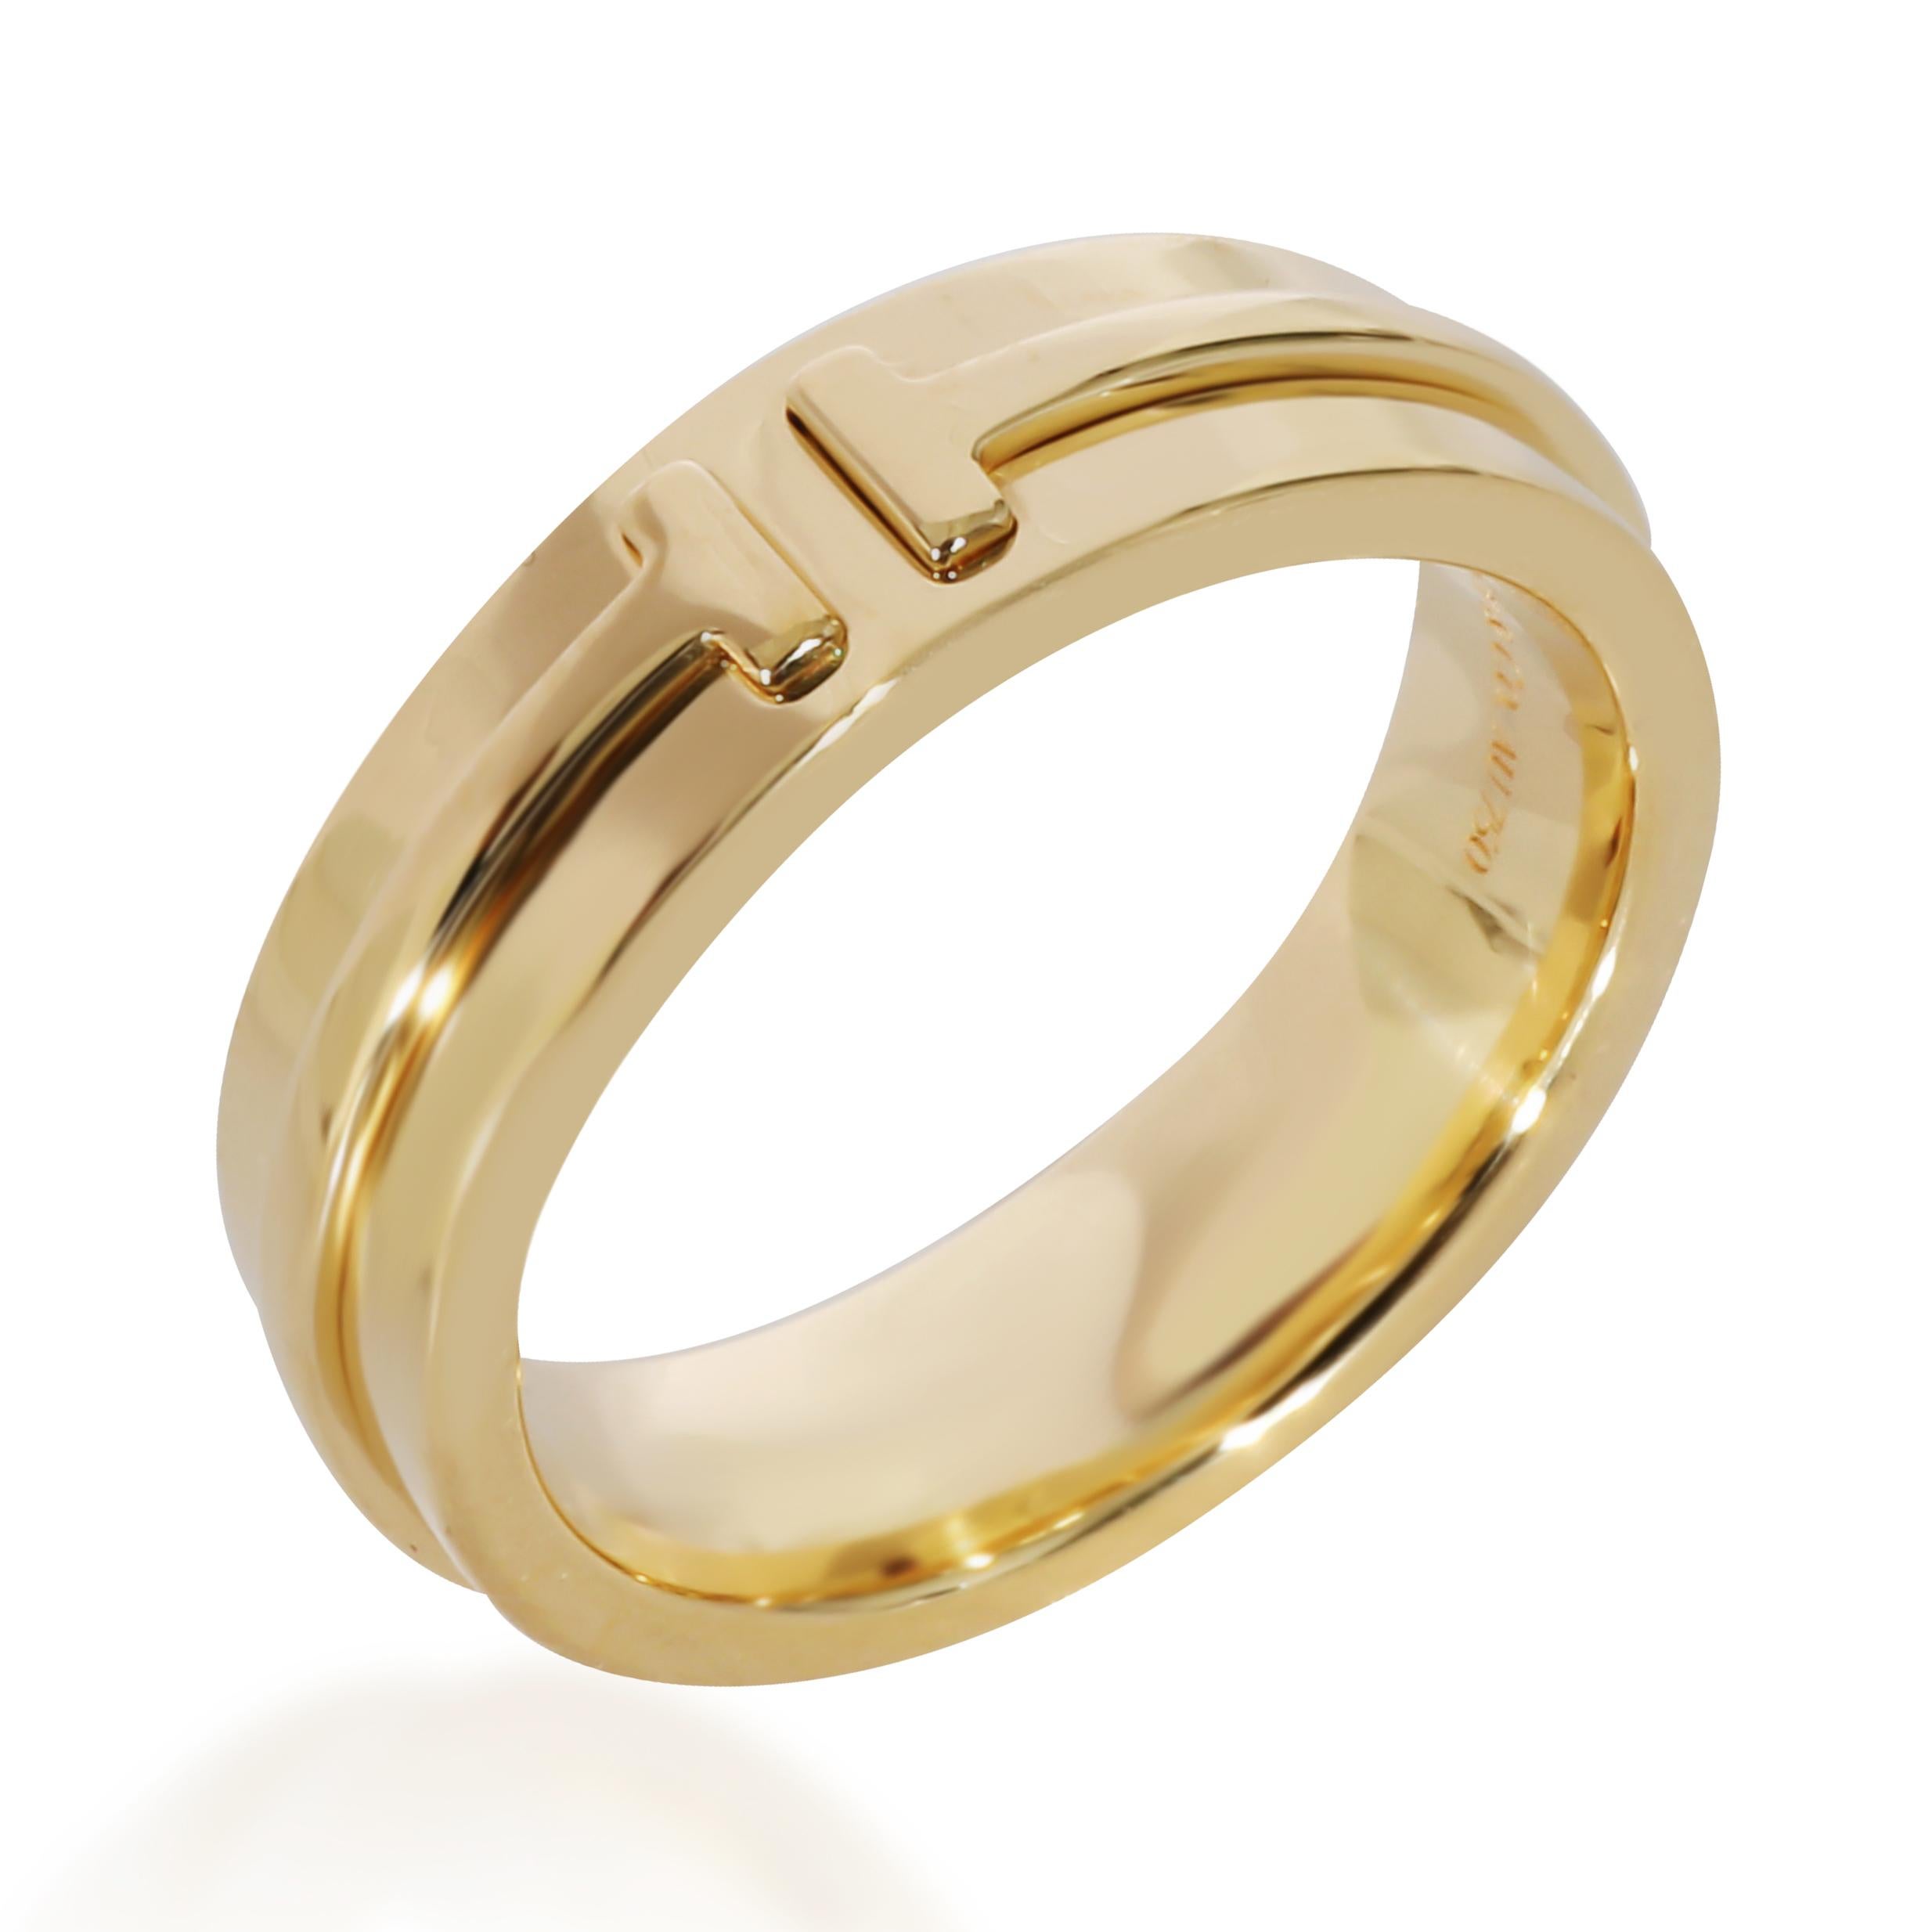 Tiffany & Co. T Wide Ring in 18K Yellow Gold

PRIMARY DETAILS
SKU: 135972
Listing Title: Tiffany & Co. T Wide Ring in 18K Yellow Gold
Condition Description: Inspired by the 'T' motif that Tiffany has been incorporating since the '80s, the T